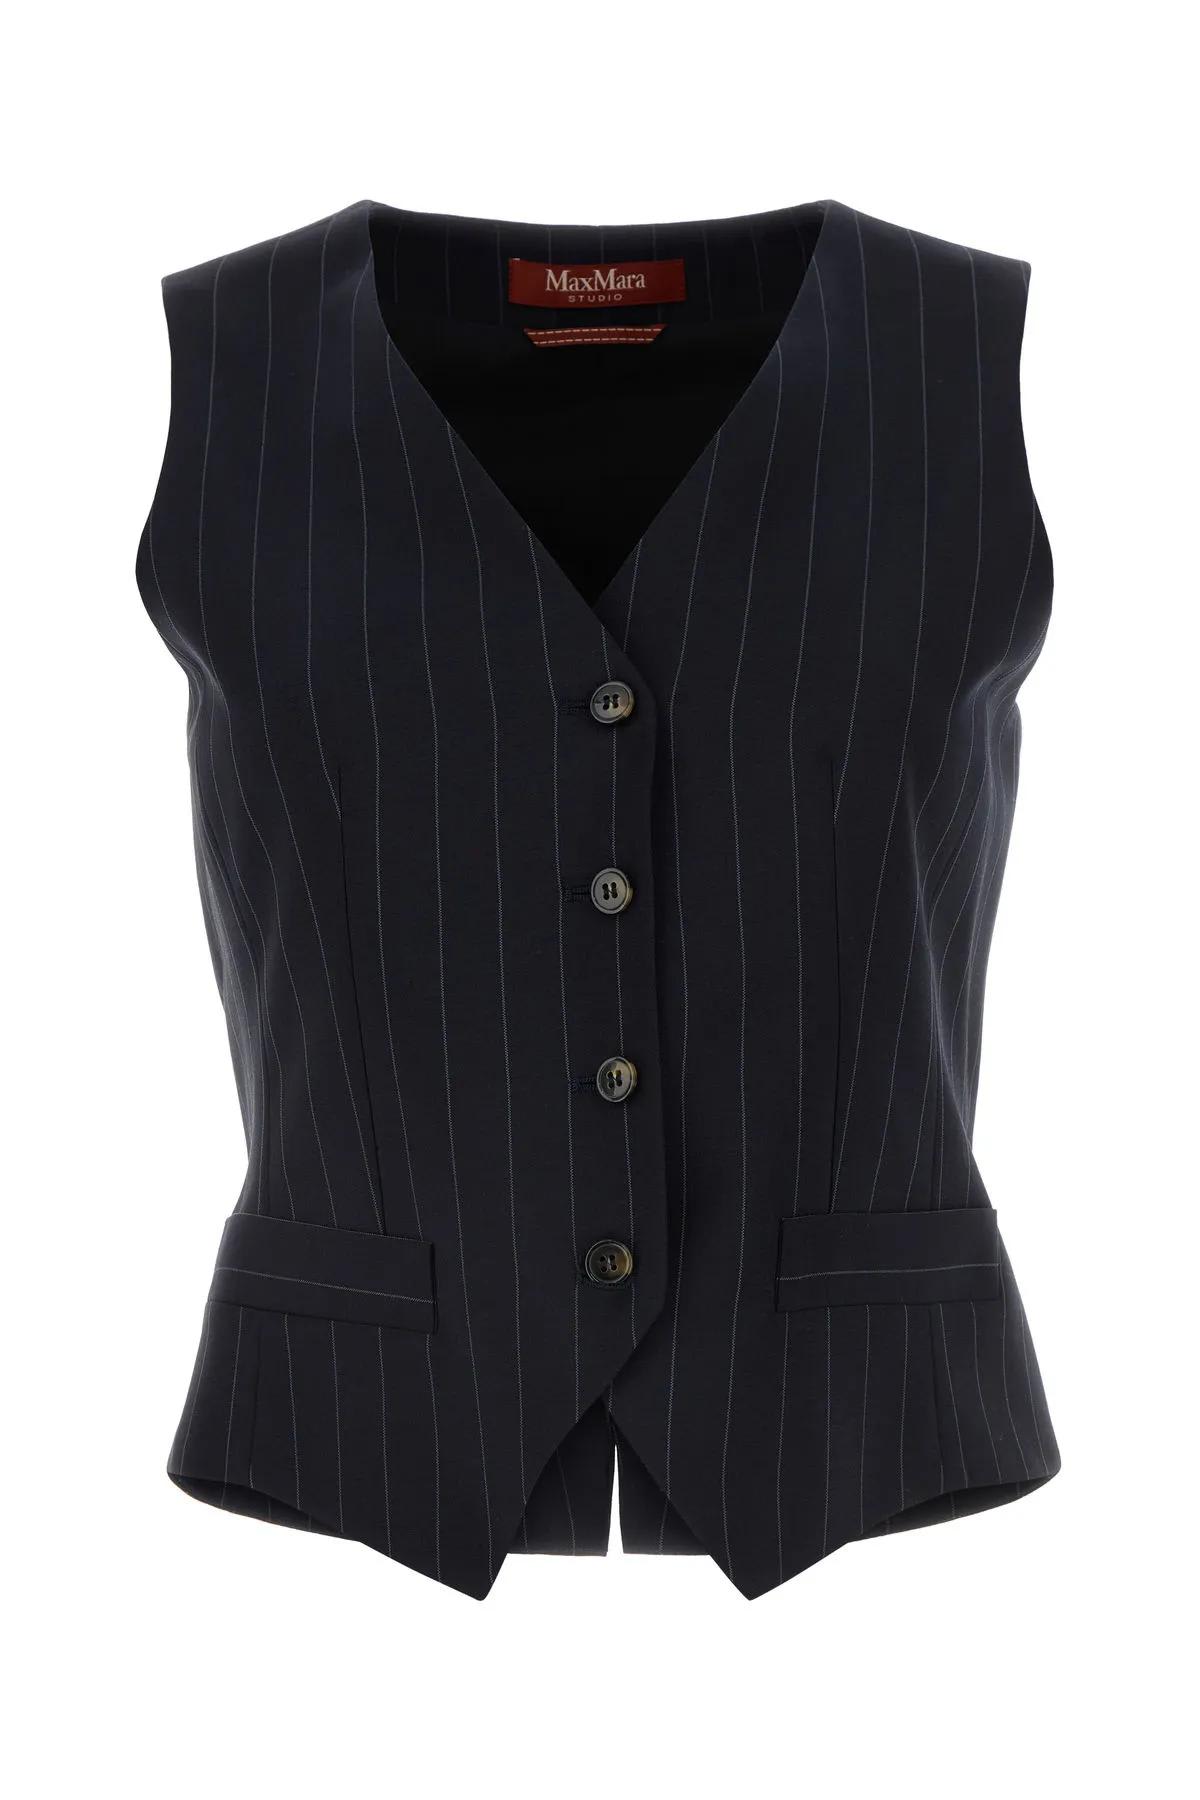 MAX MARA EMBROIDERED WOOL ABOVE VEST